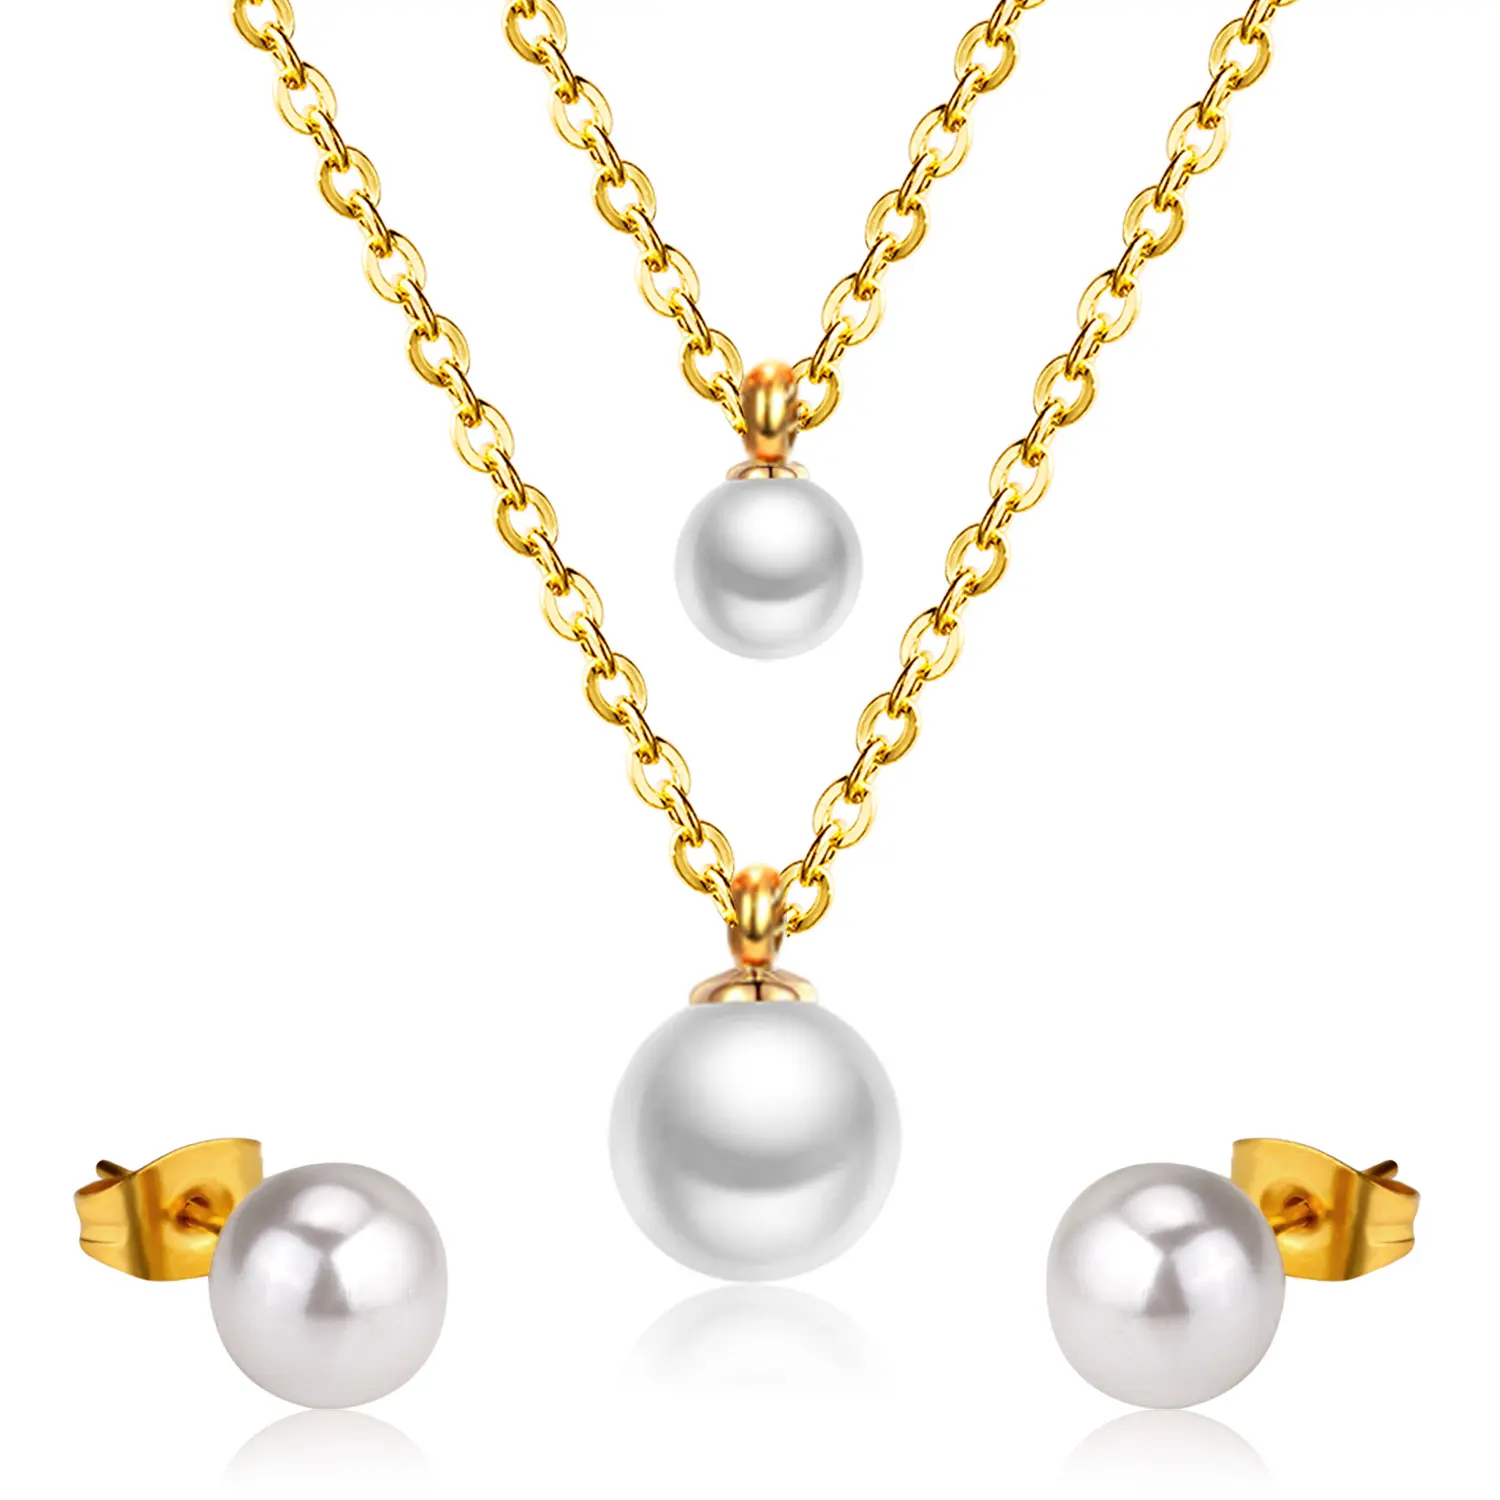 English Shape Fashion Stainless Steel Romantic Double Chain Long Pendant Party 2 Sets Pearl Necklace Earrings Pearl Jewelry Set